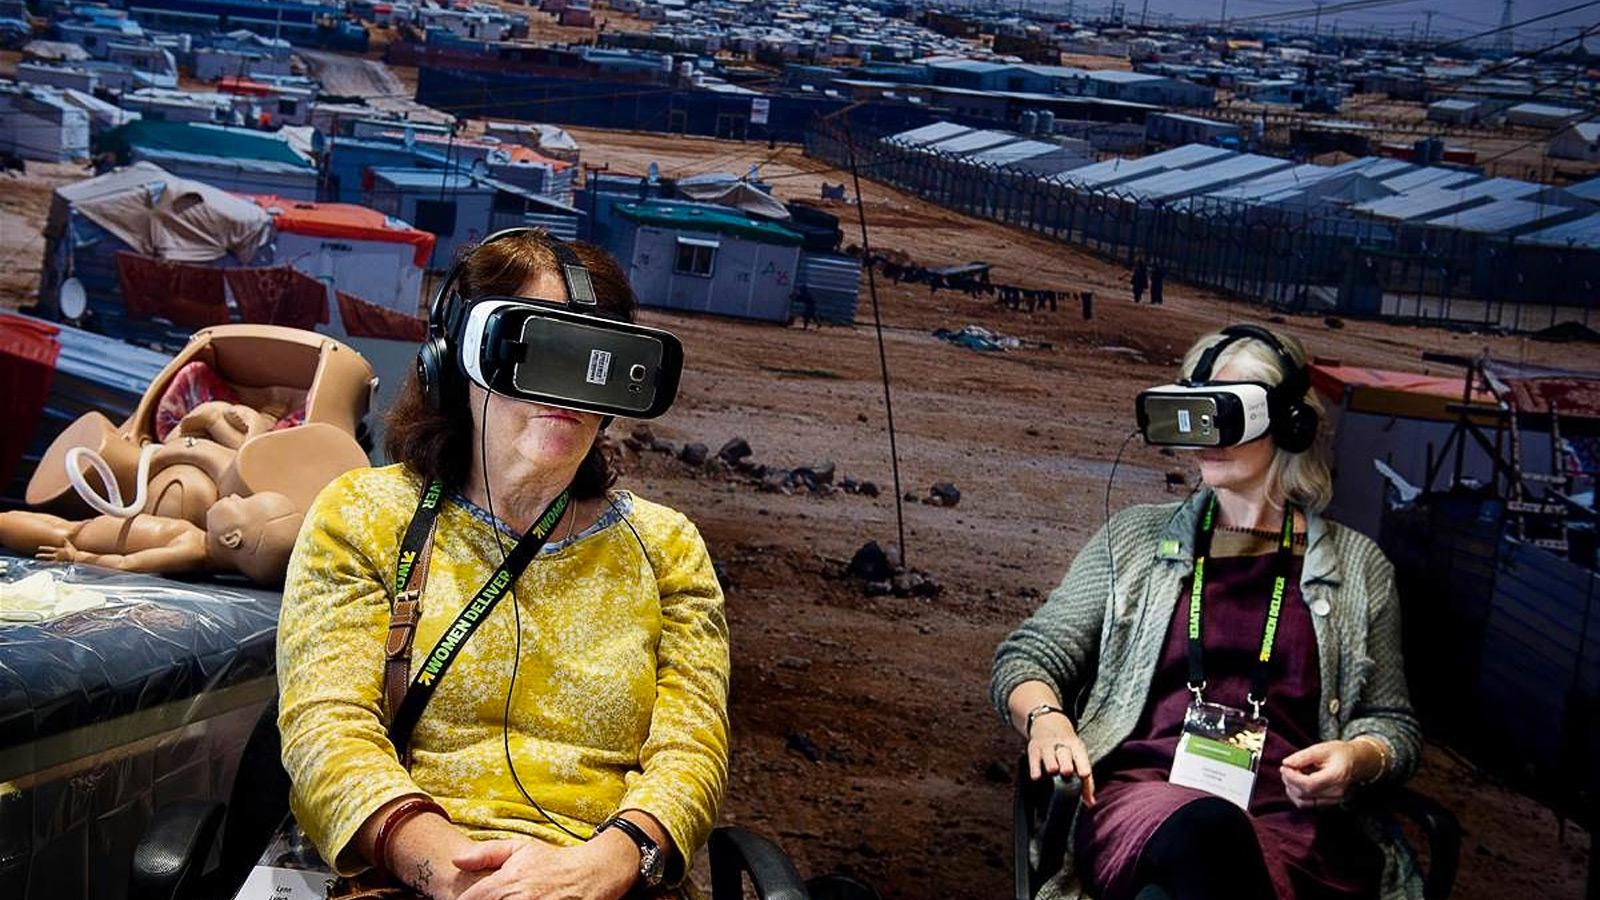 VR users projected in a 360 view of a refugees camp